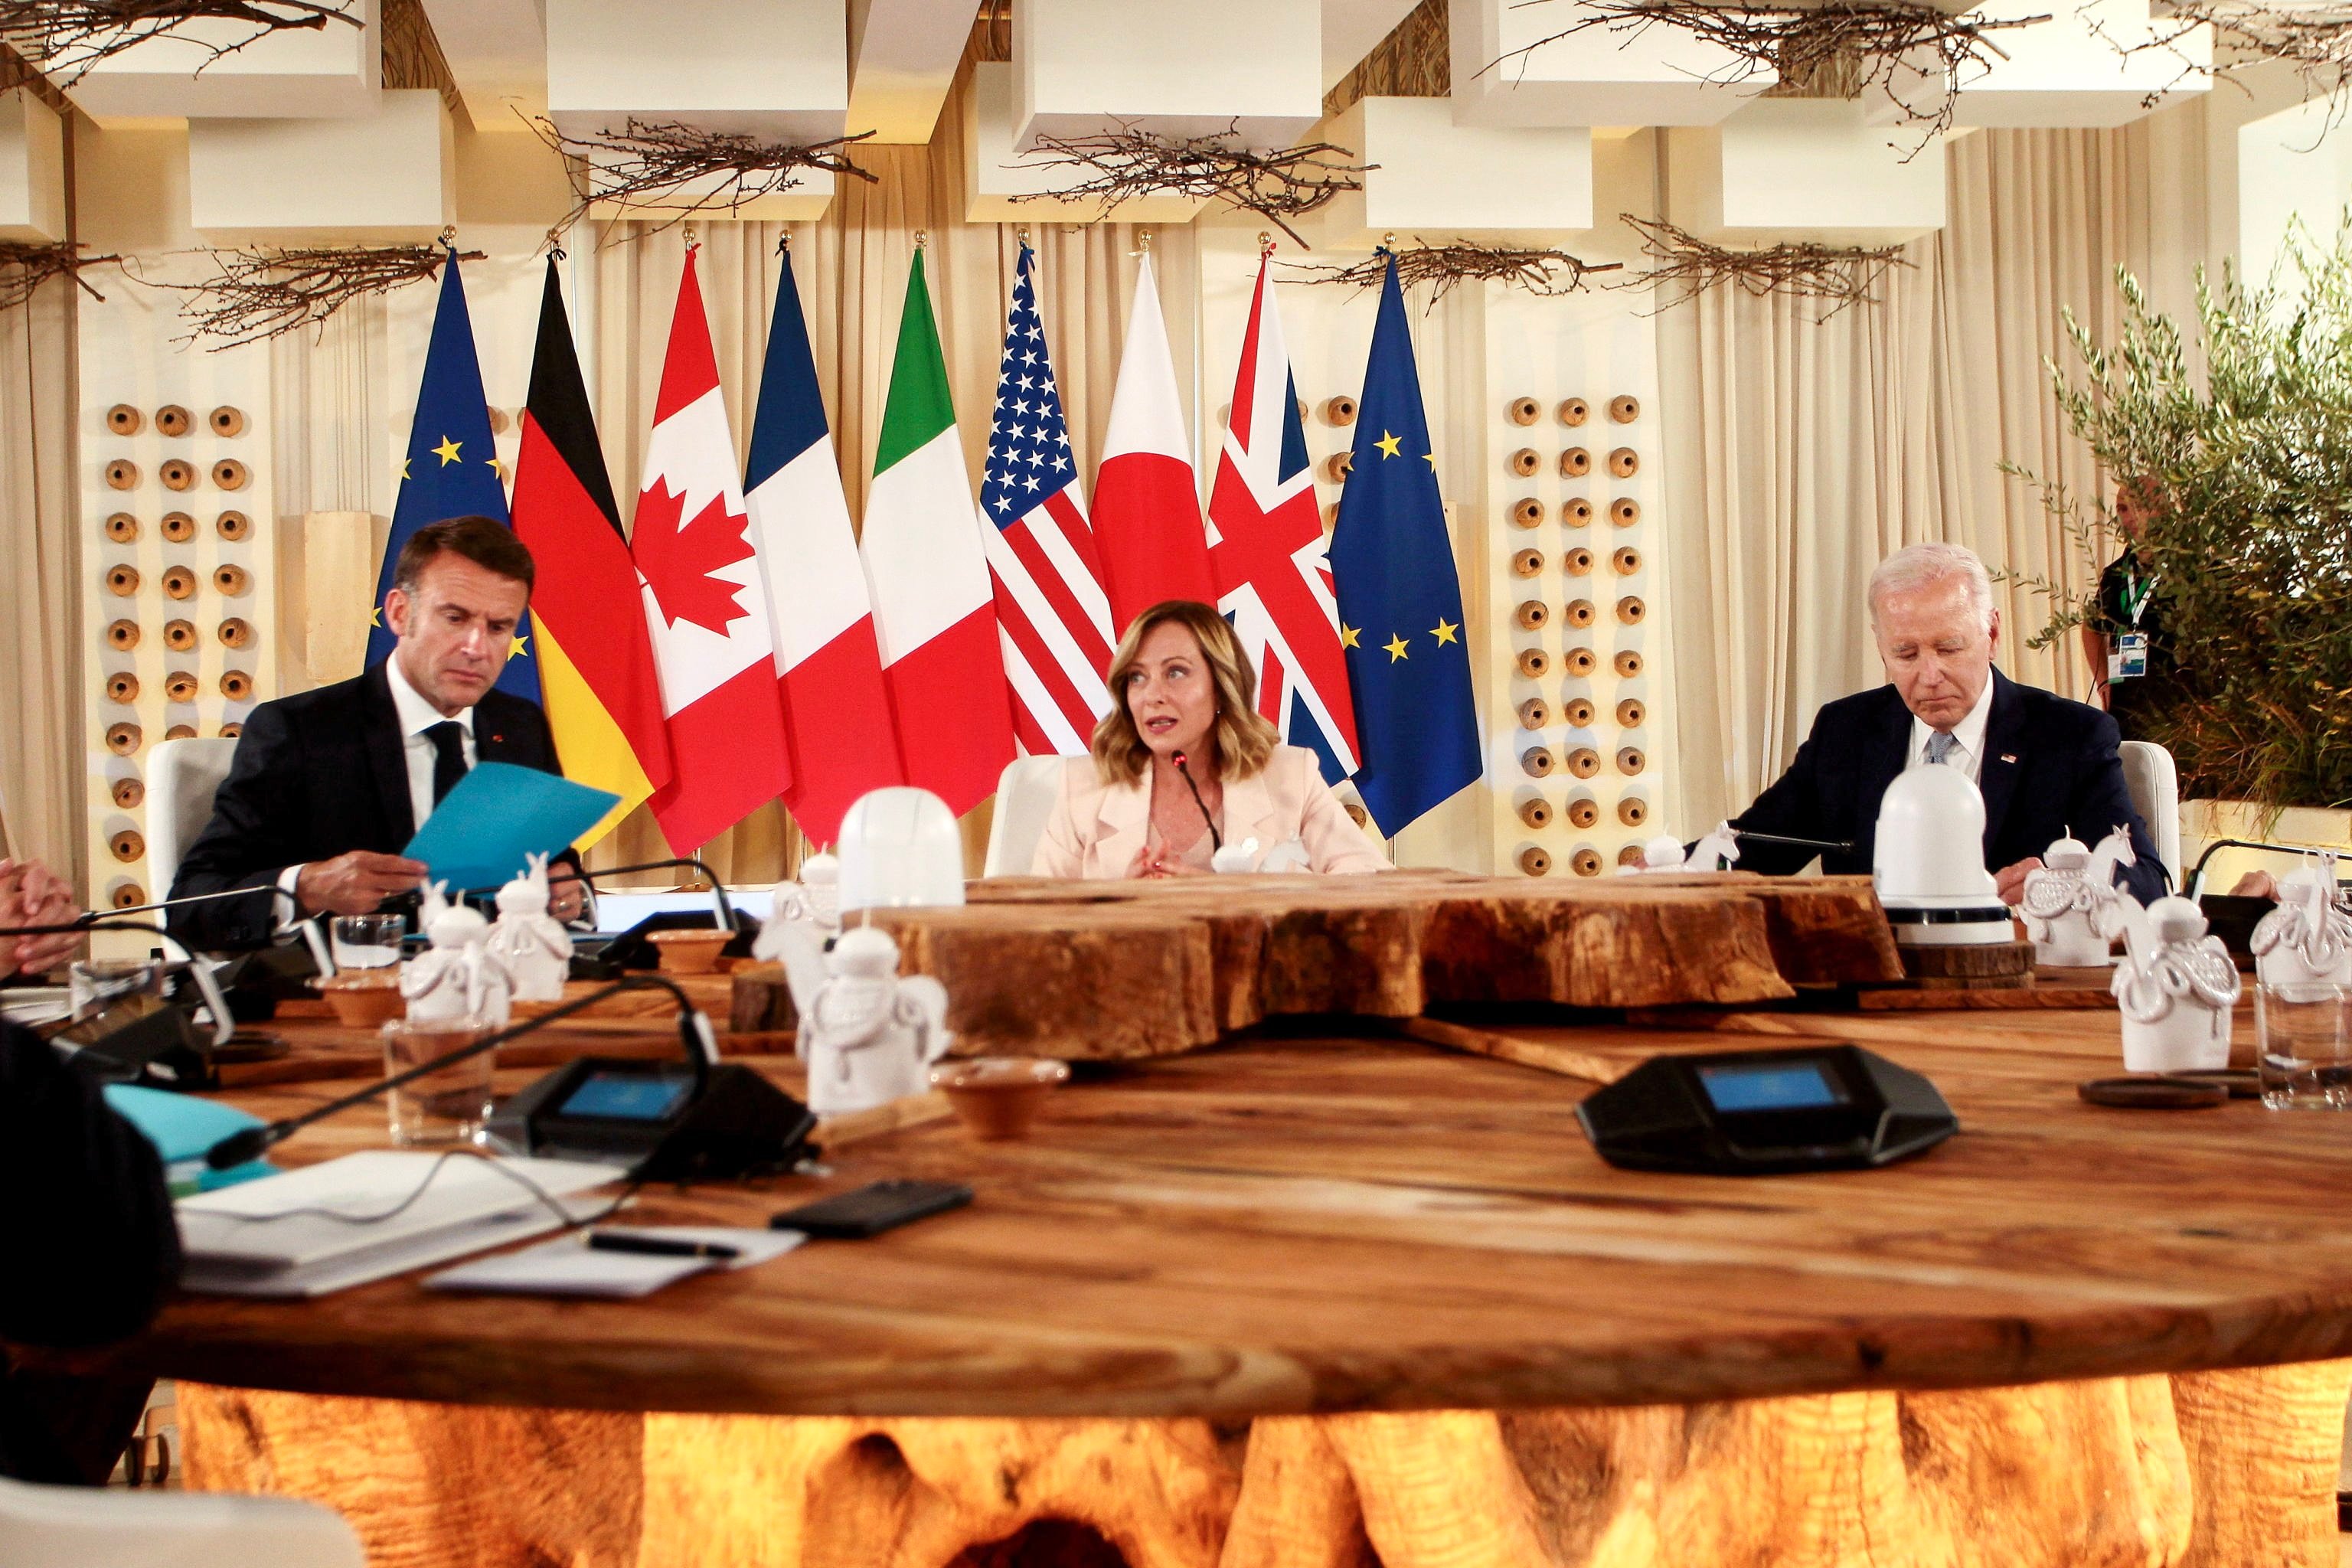 From left:French President Emmanuel Macron, Italian Prime Minister Giorgia Meloni and US President Joe Biden attend a round table meeting at the G7 summit in Borgo Egnazia, Italy on Thursday. Photo: EPA-EFE